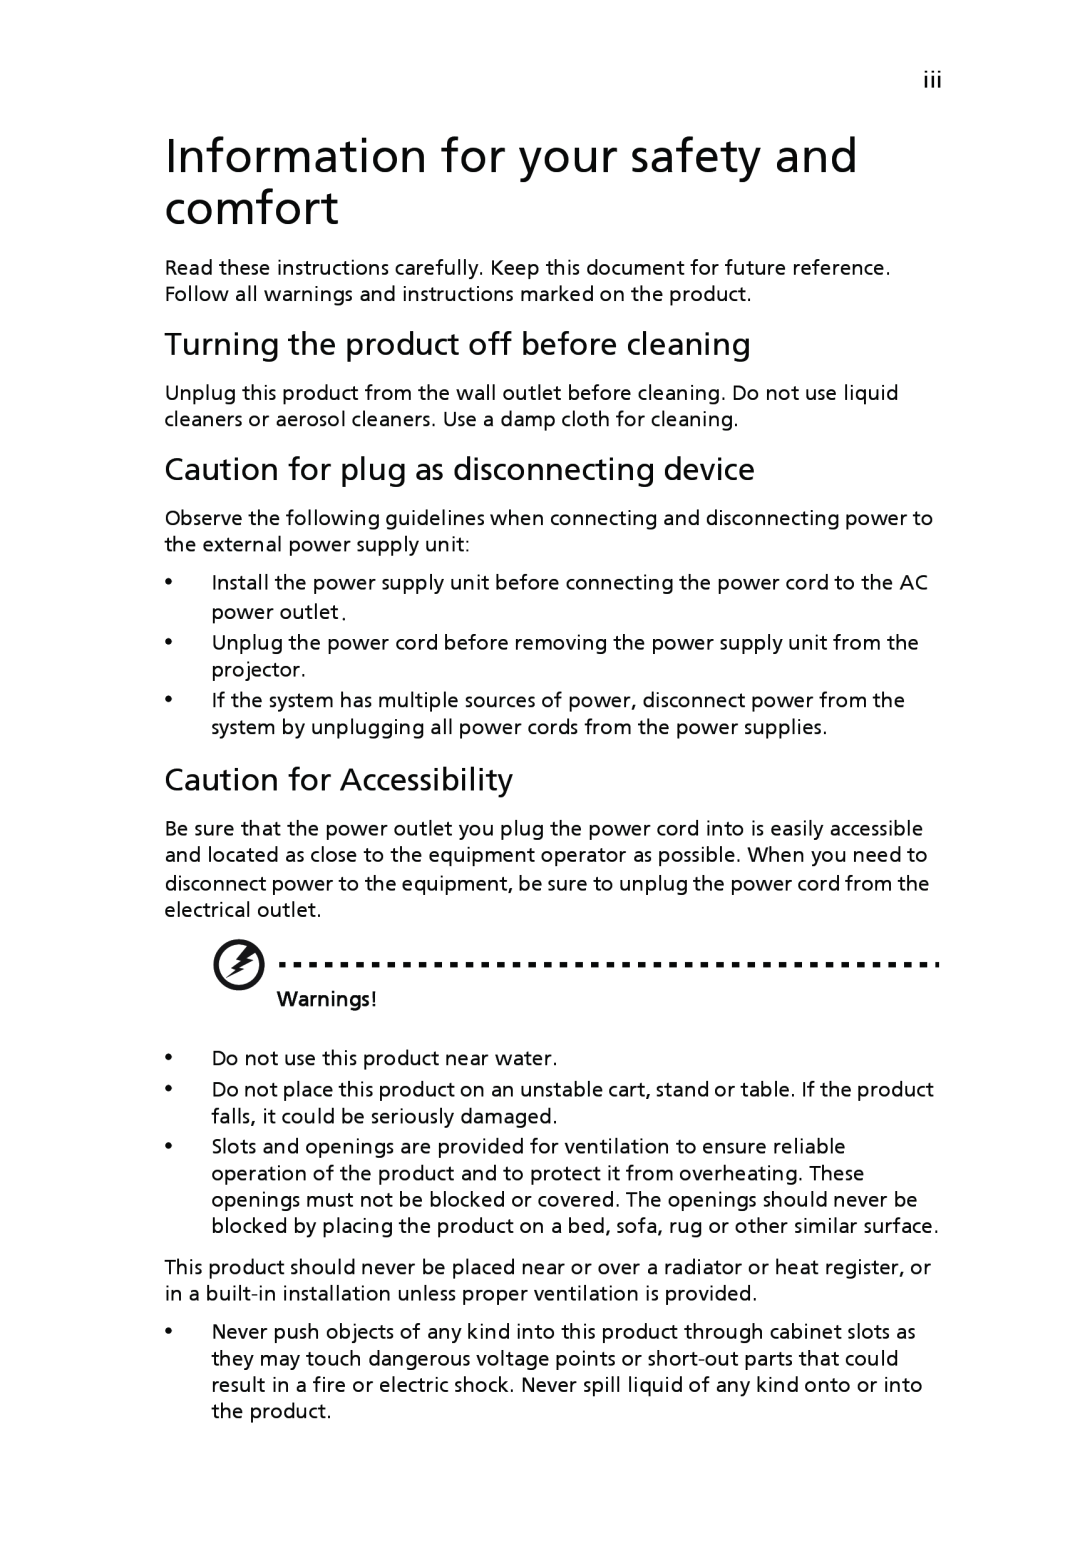 Acer P3250 Series, P3150 Series Information for your safety and comfort, Turning the product off before cleaning, Warnings 